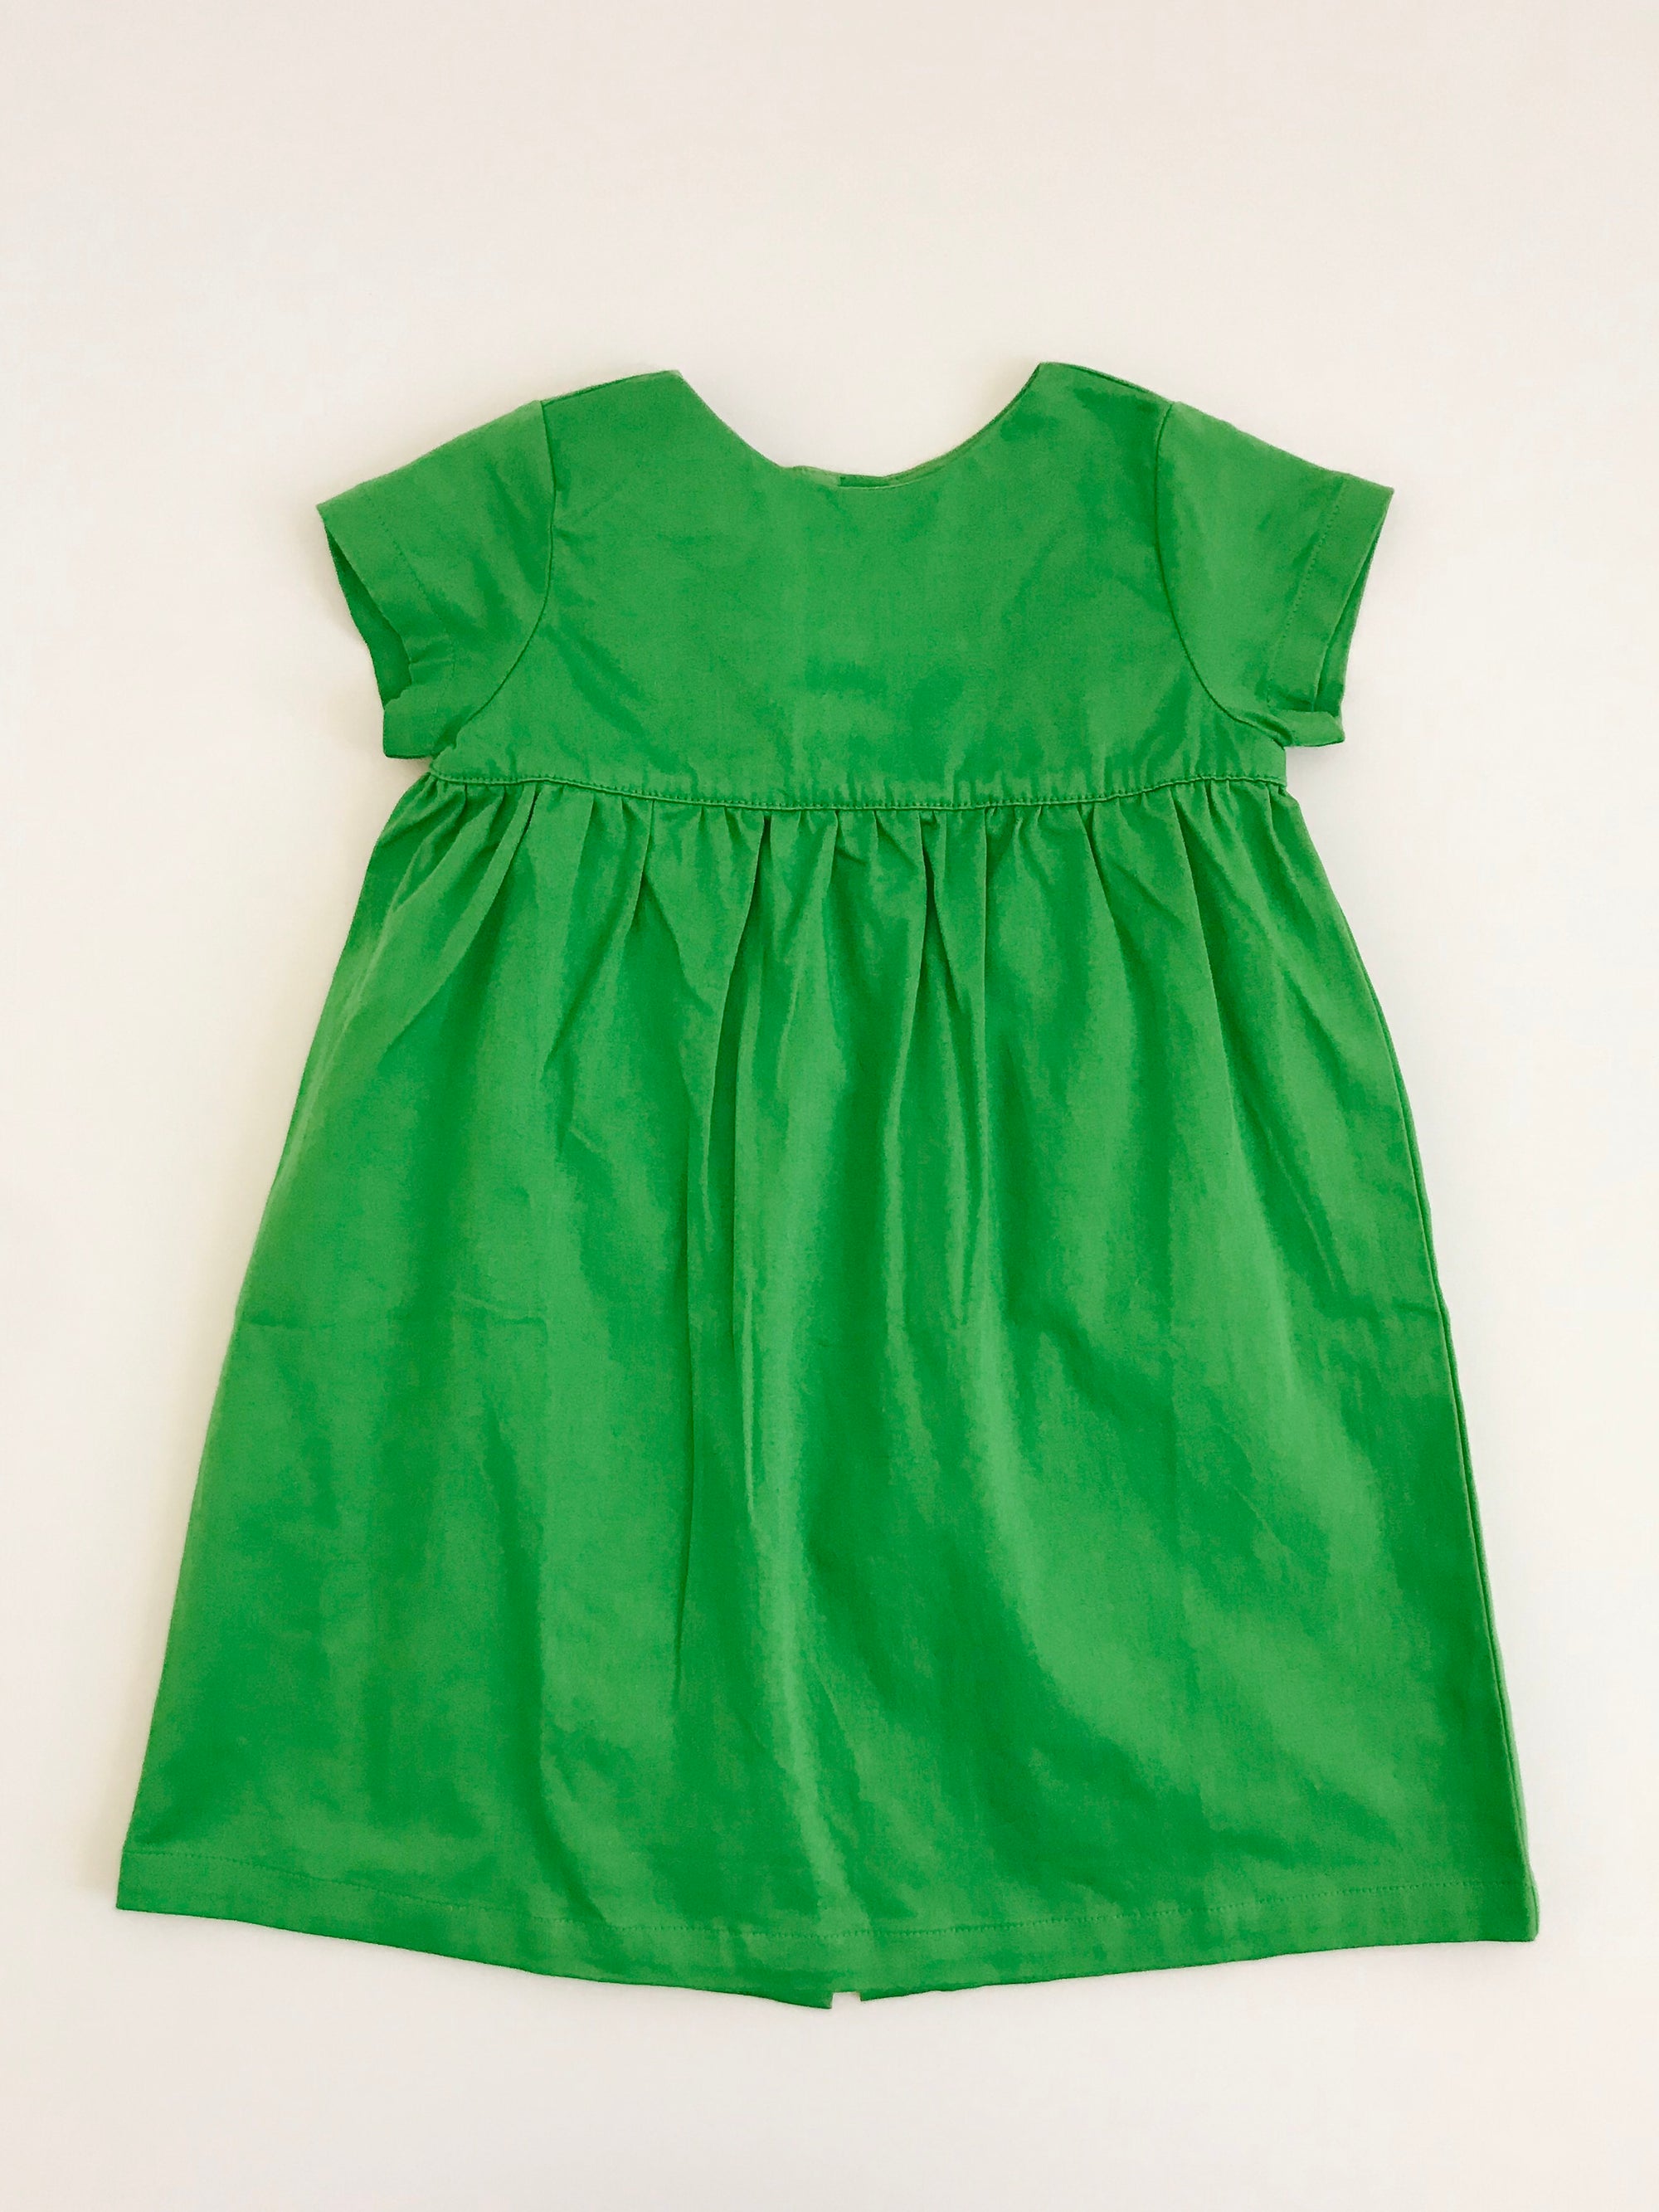 The Dolly Dress in Emerald